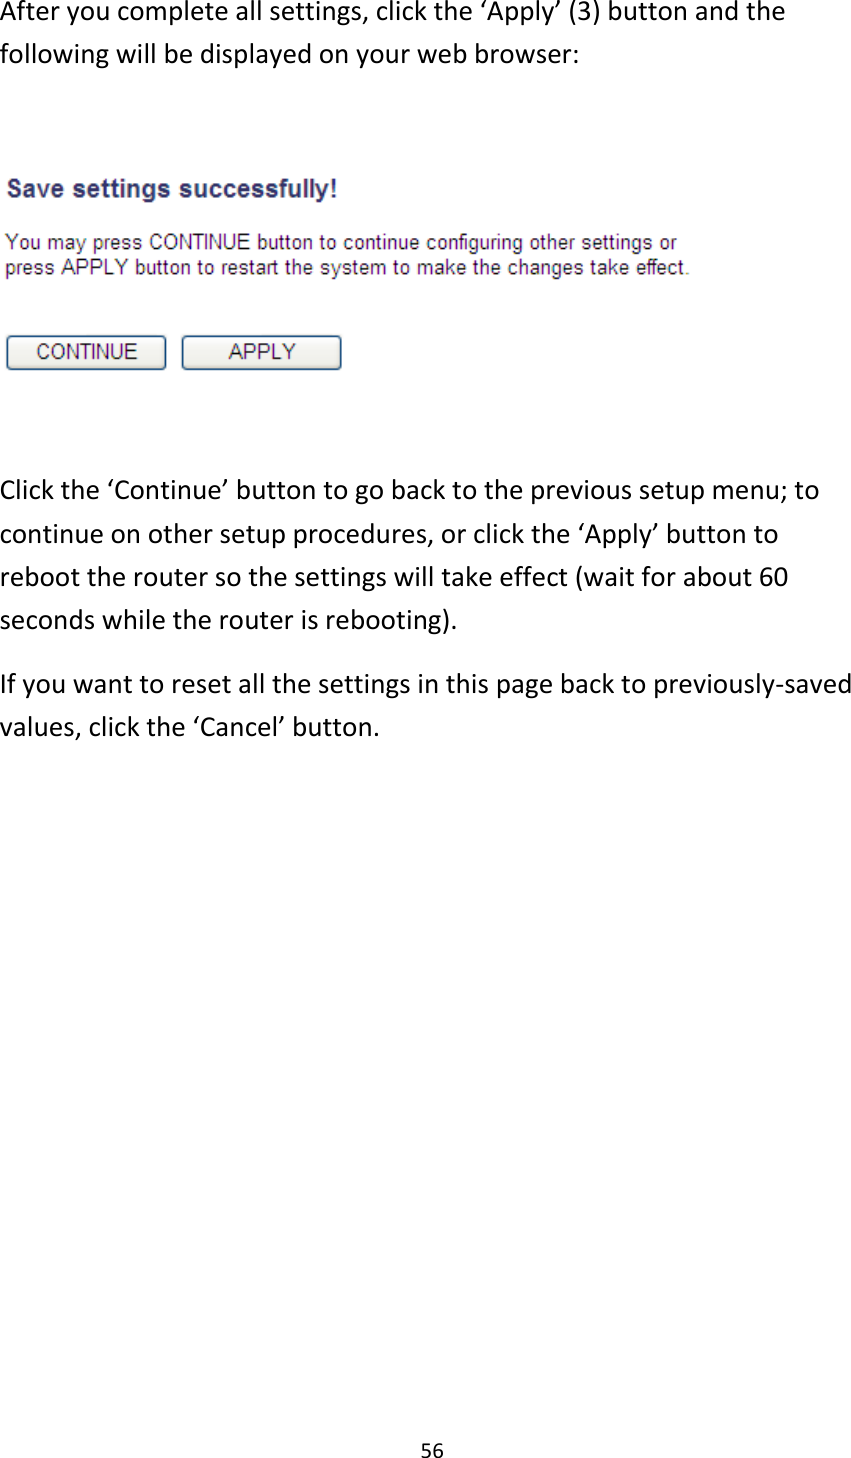 56 After you complete all settings, click the ‘Apply’ (3) button and the following will be displayed on your web browser:    Click the ‘Continue’ button to go back to the previous setup menu; to continue on other setup procedures, or click the ‘Apply’ button to reboot the router so the settings will take effect (wait for about 60 seconds while the router is rebooting). If you want to reset all the settings in this page back to previously-saved values, click the ‘Cancel’ button.   